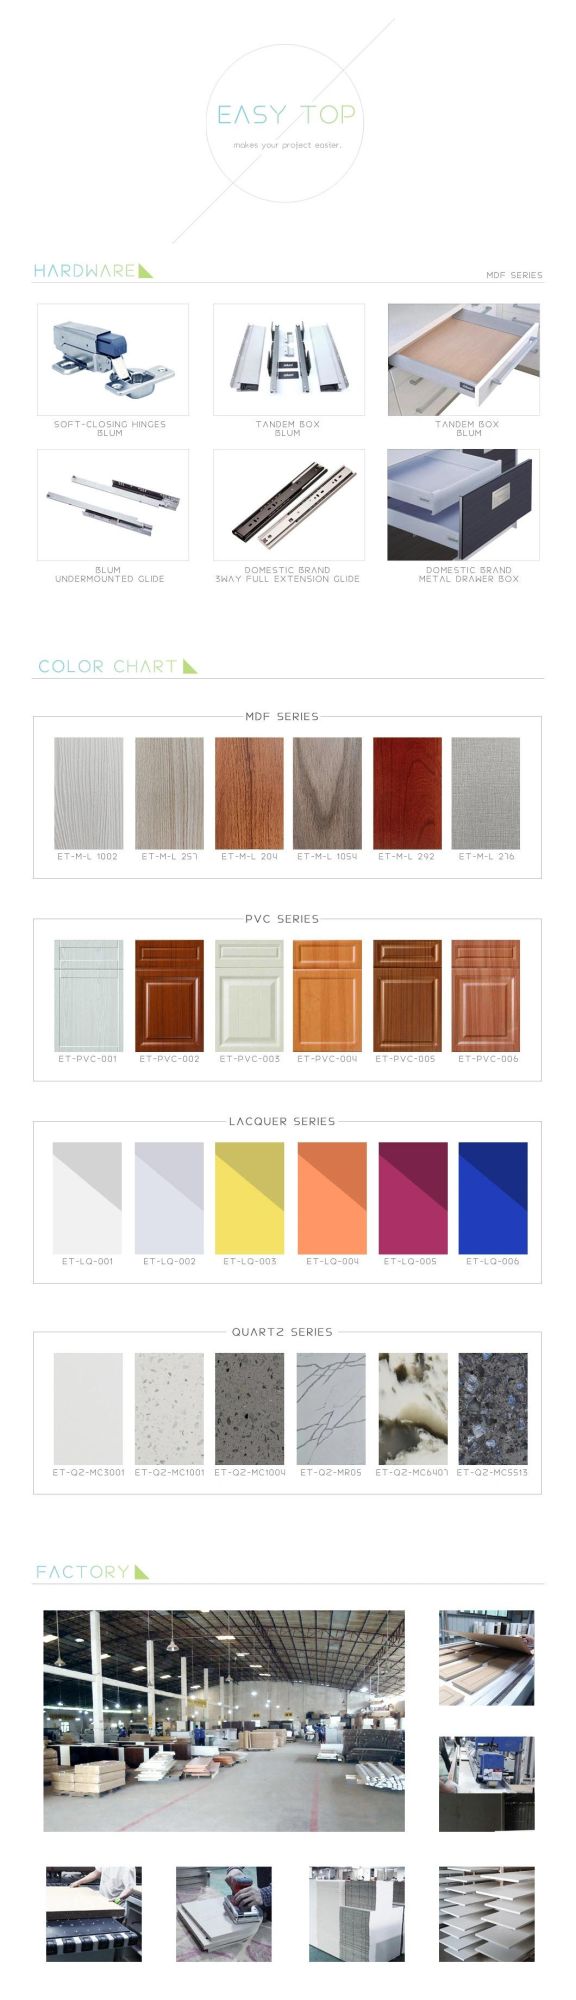 Economical and Practical Cupboard White MDF Lacquer Kitchen Cabinets Furniture Guangzhou